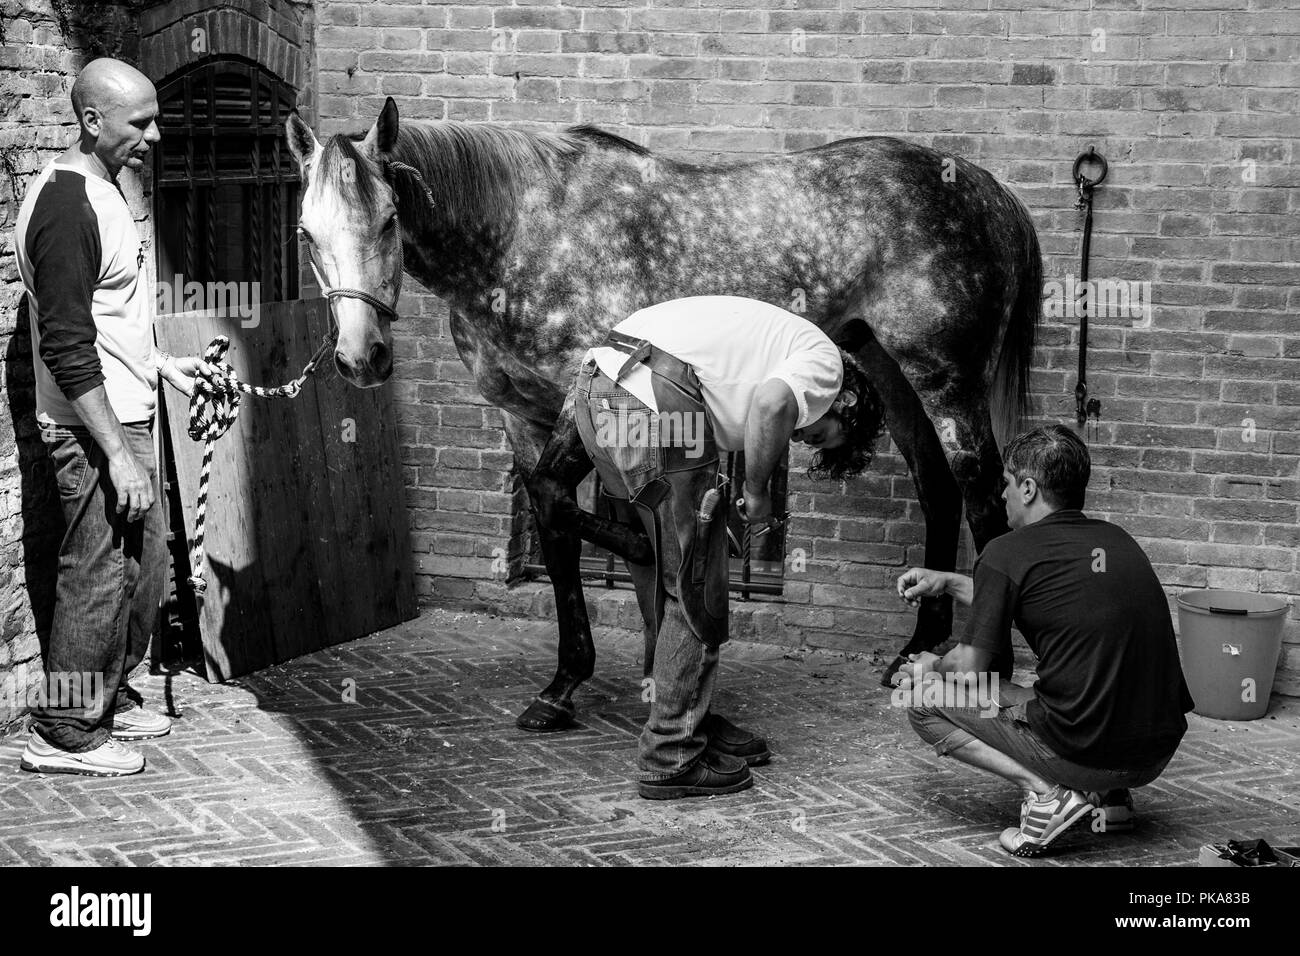 Grooms From The Lupa (She Wolf) Contrada Shoeing Their Horse, Palio di Siena, Siena, Italy Stock Photo